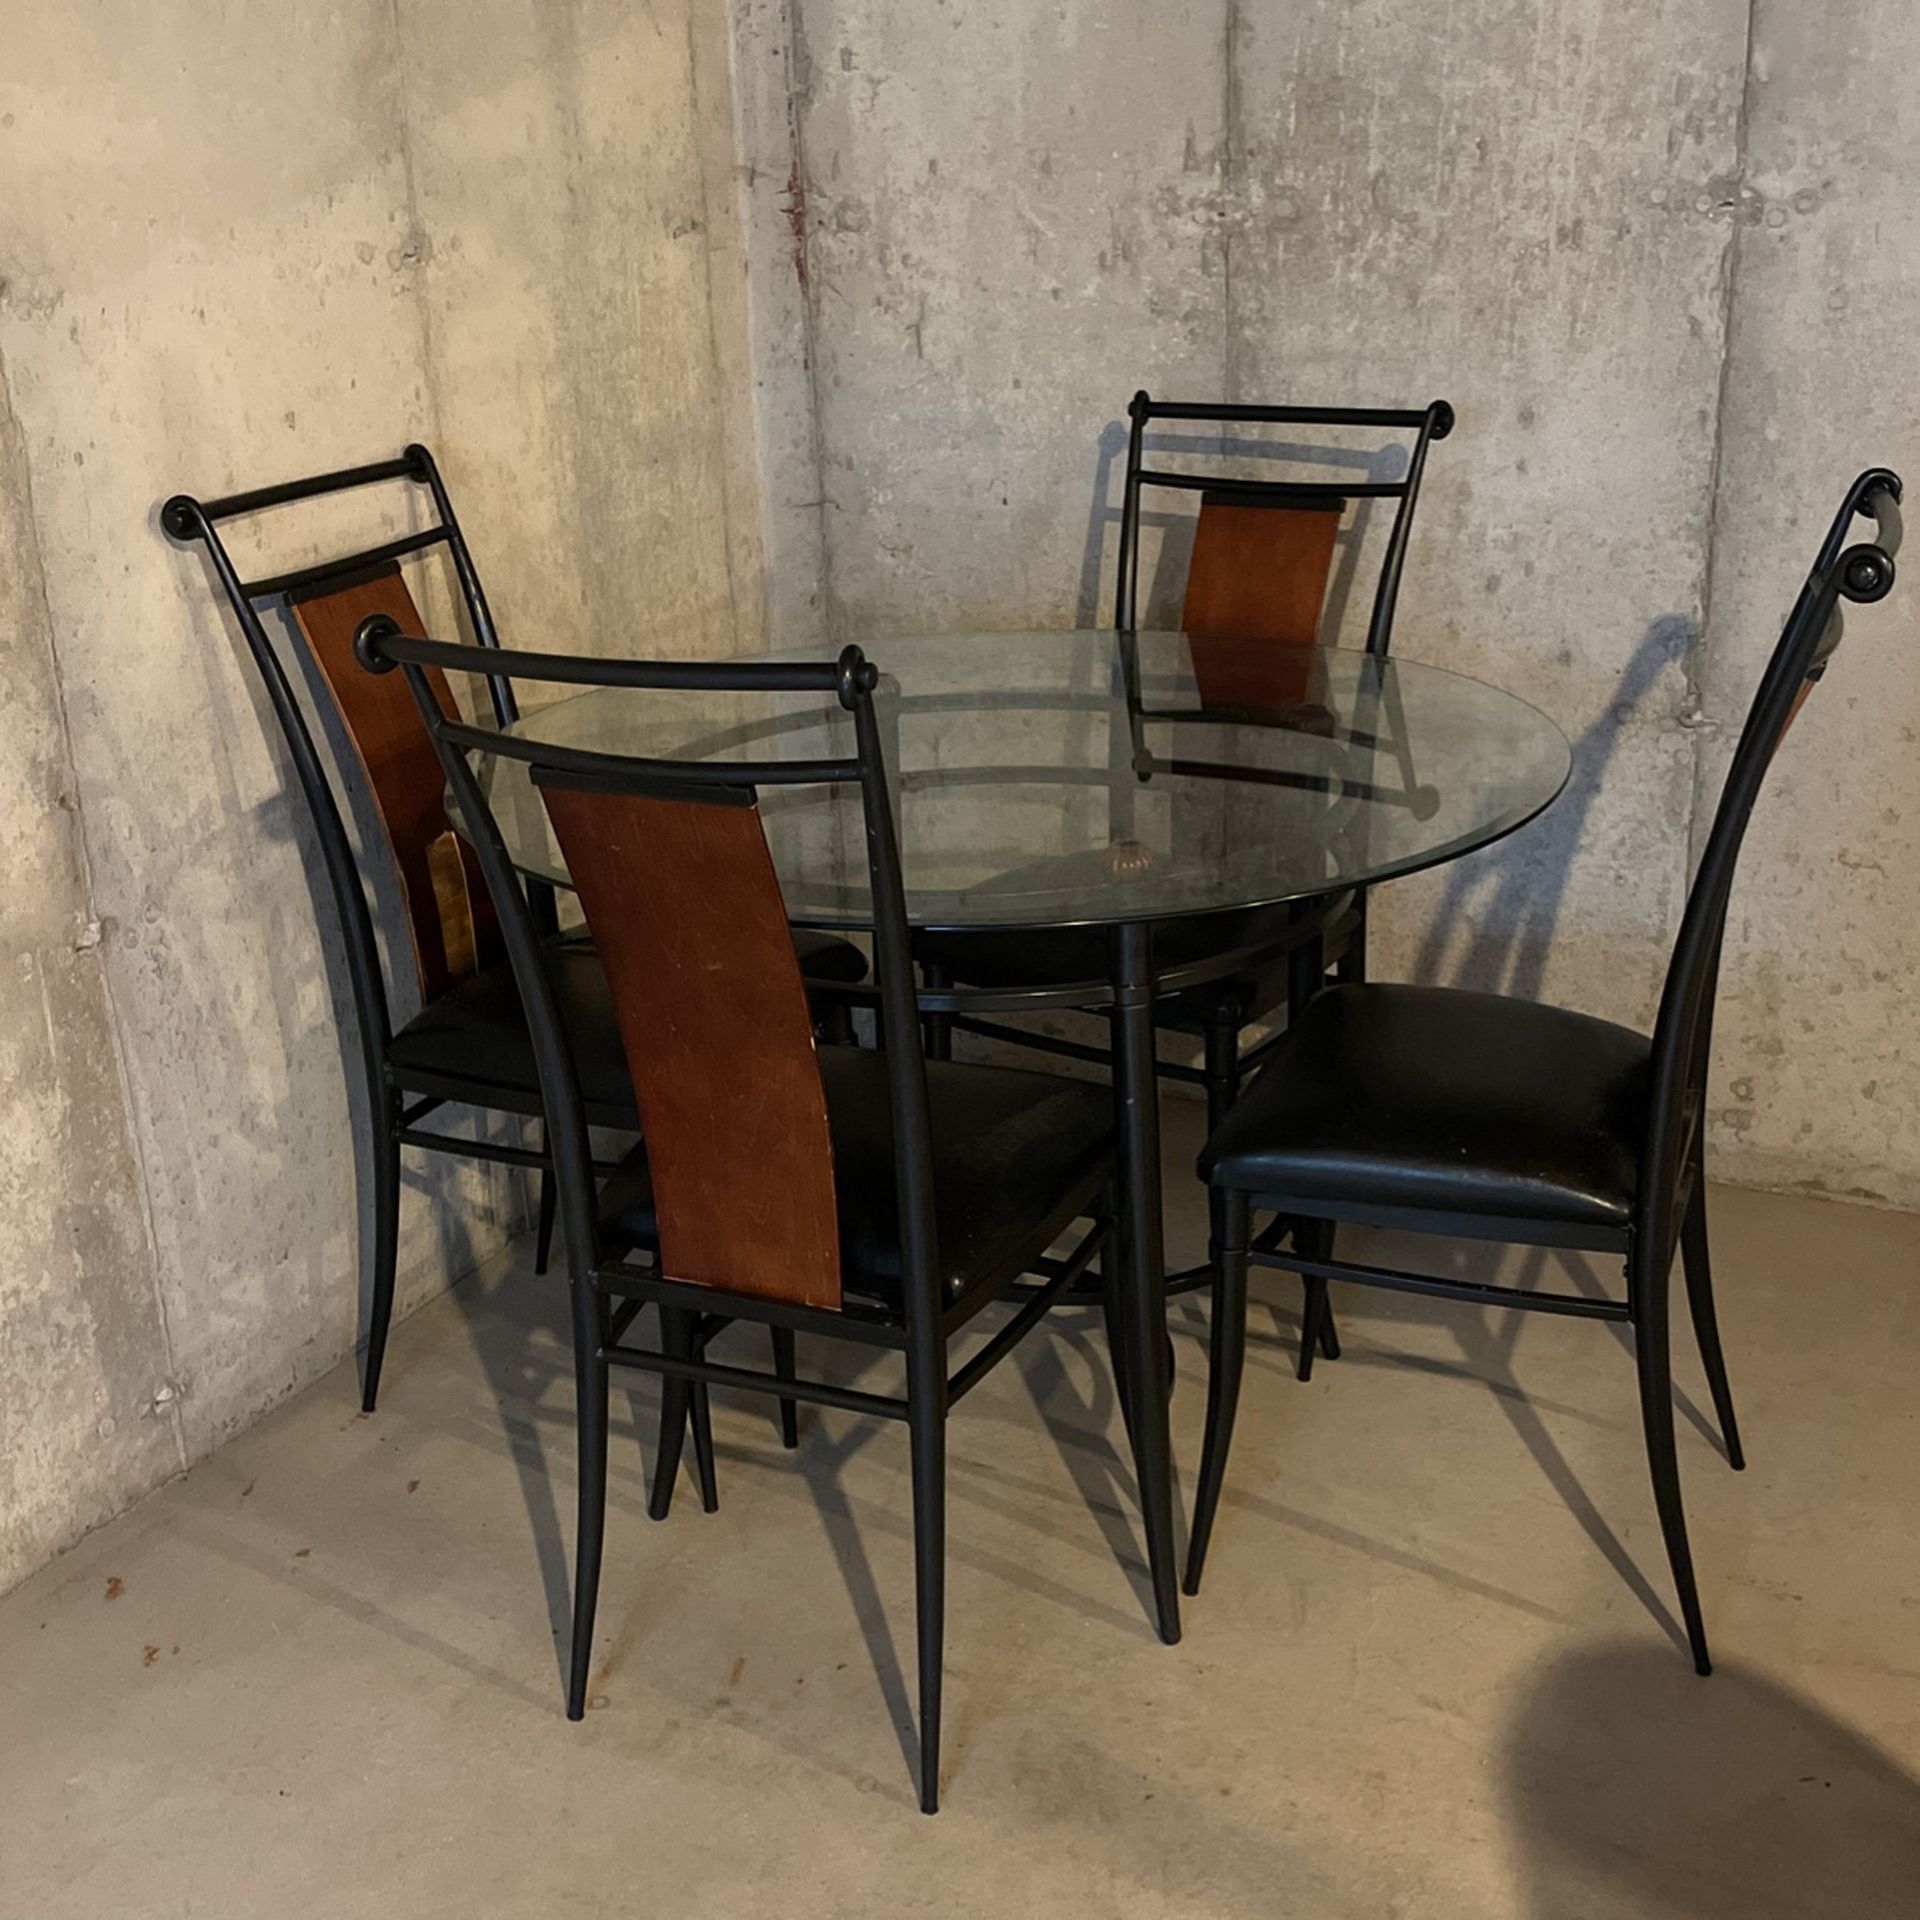 Breakfast Table With Chairs 